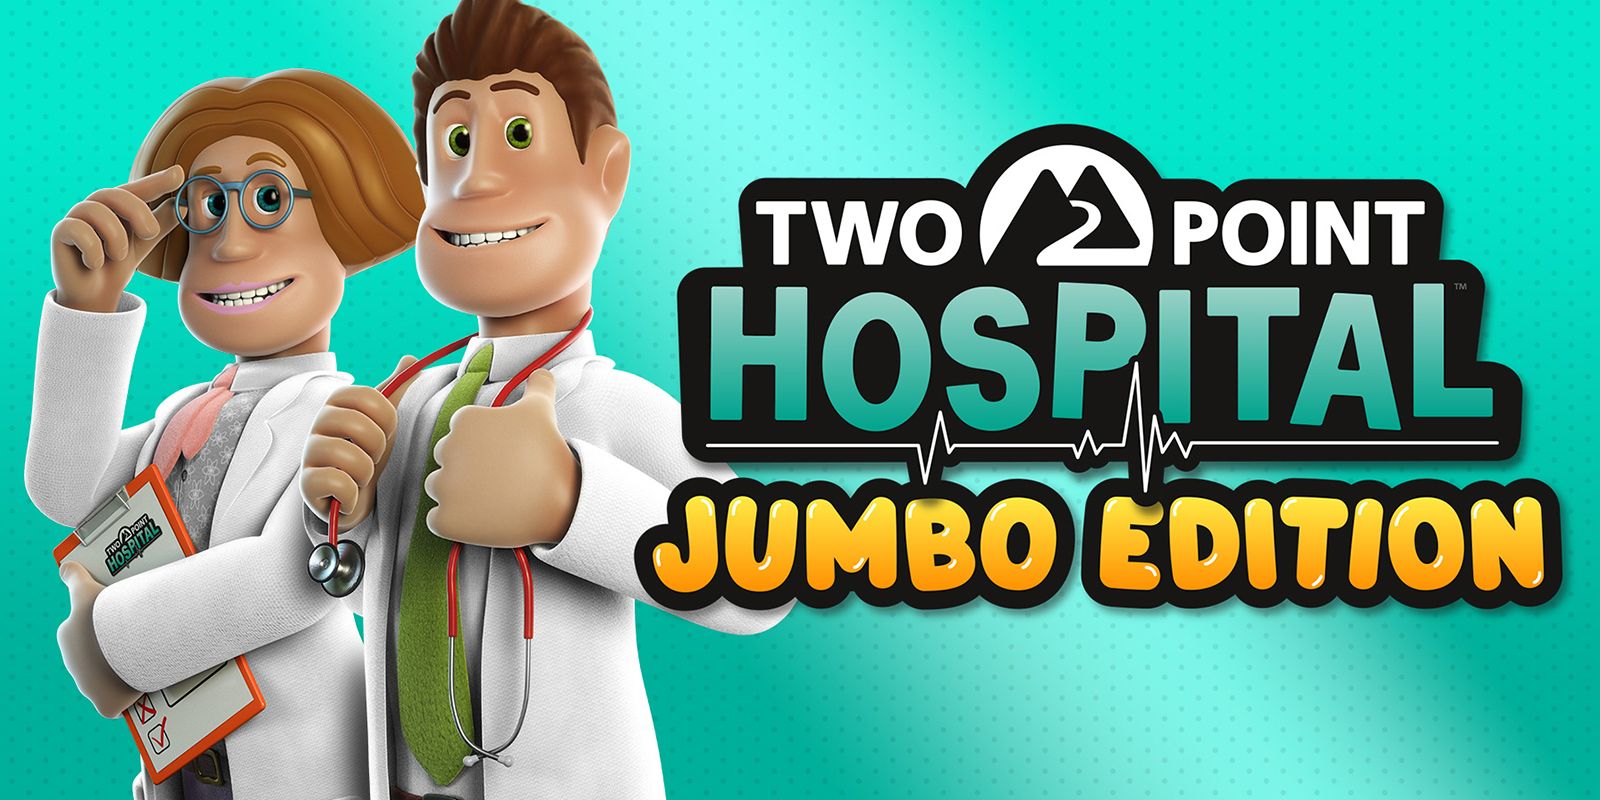 Two doctors featured on art for Two Point Hospital Jumbo Edition.